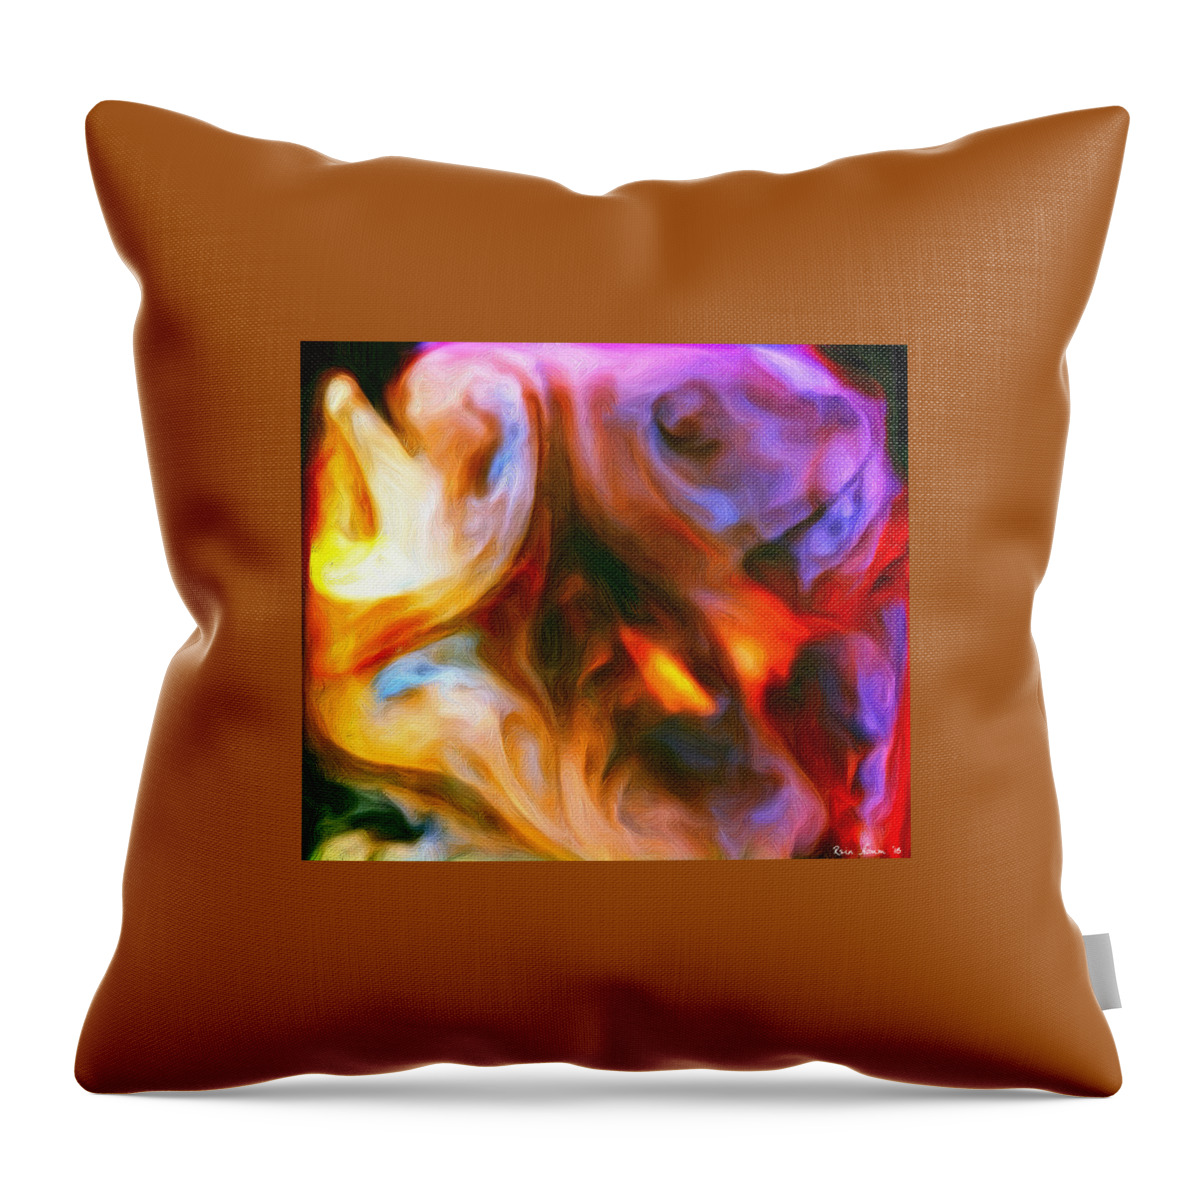  Throw Pillow featuring the mixed media One-eyed Abstract by Rein Nomm